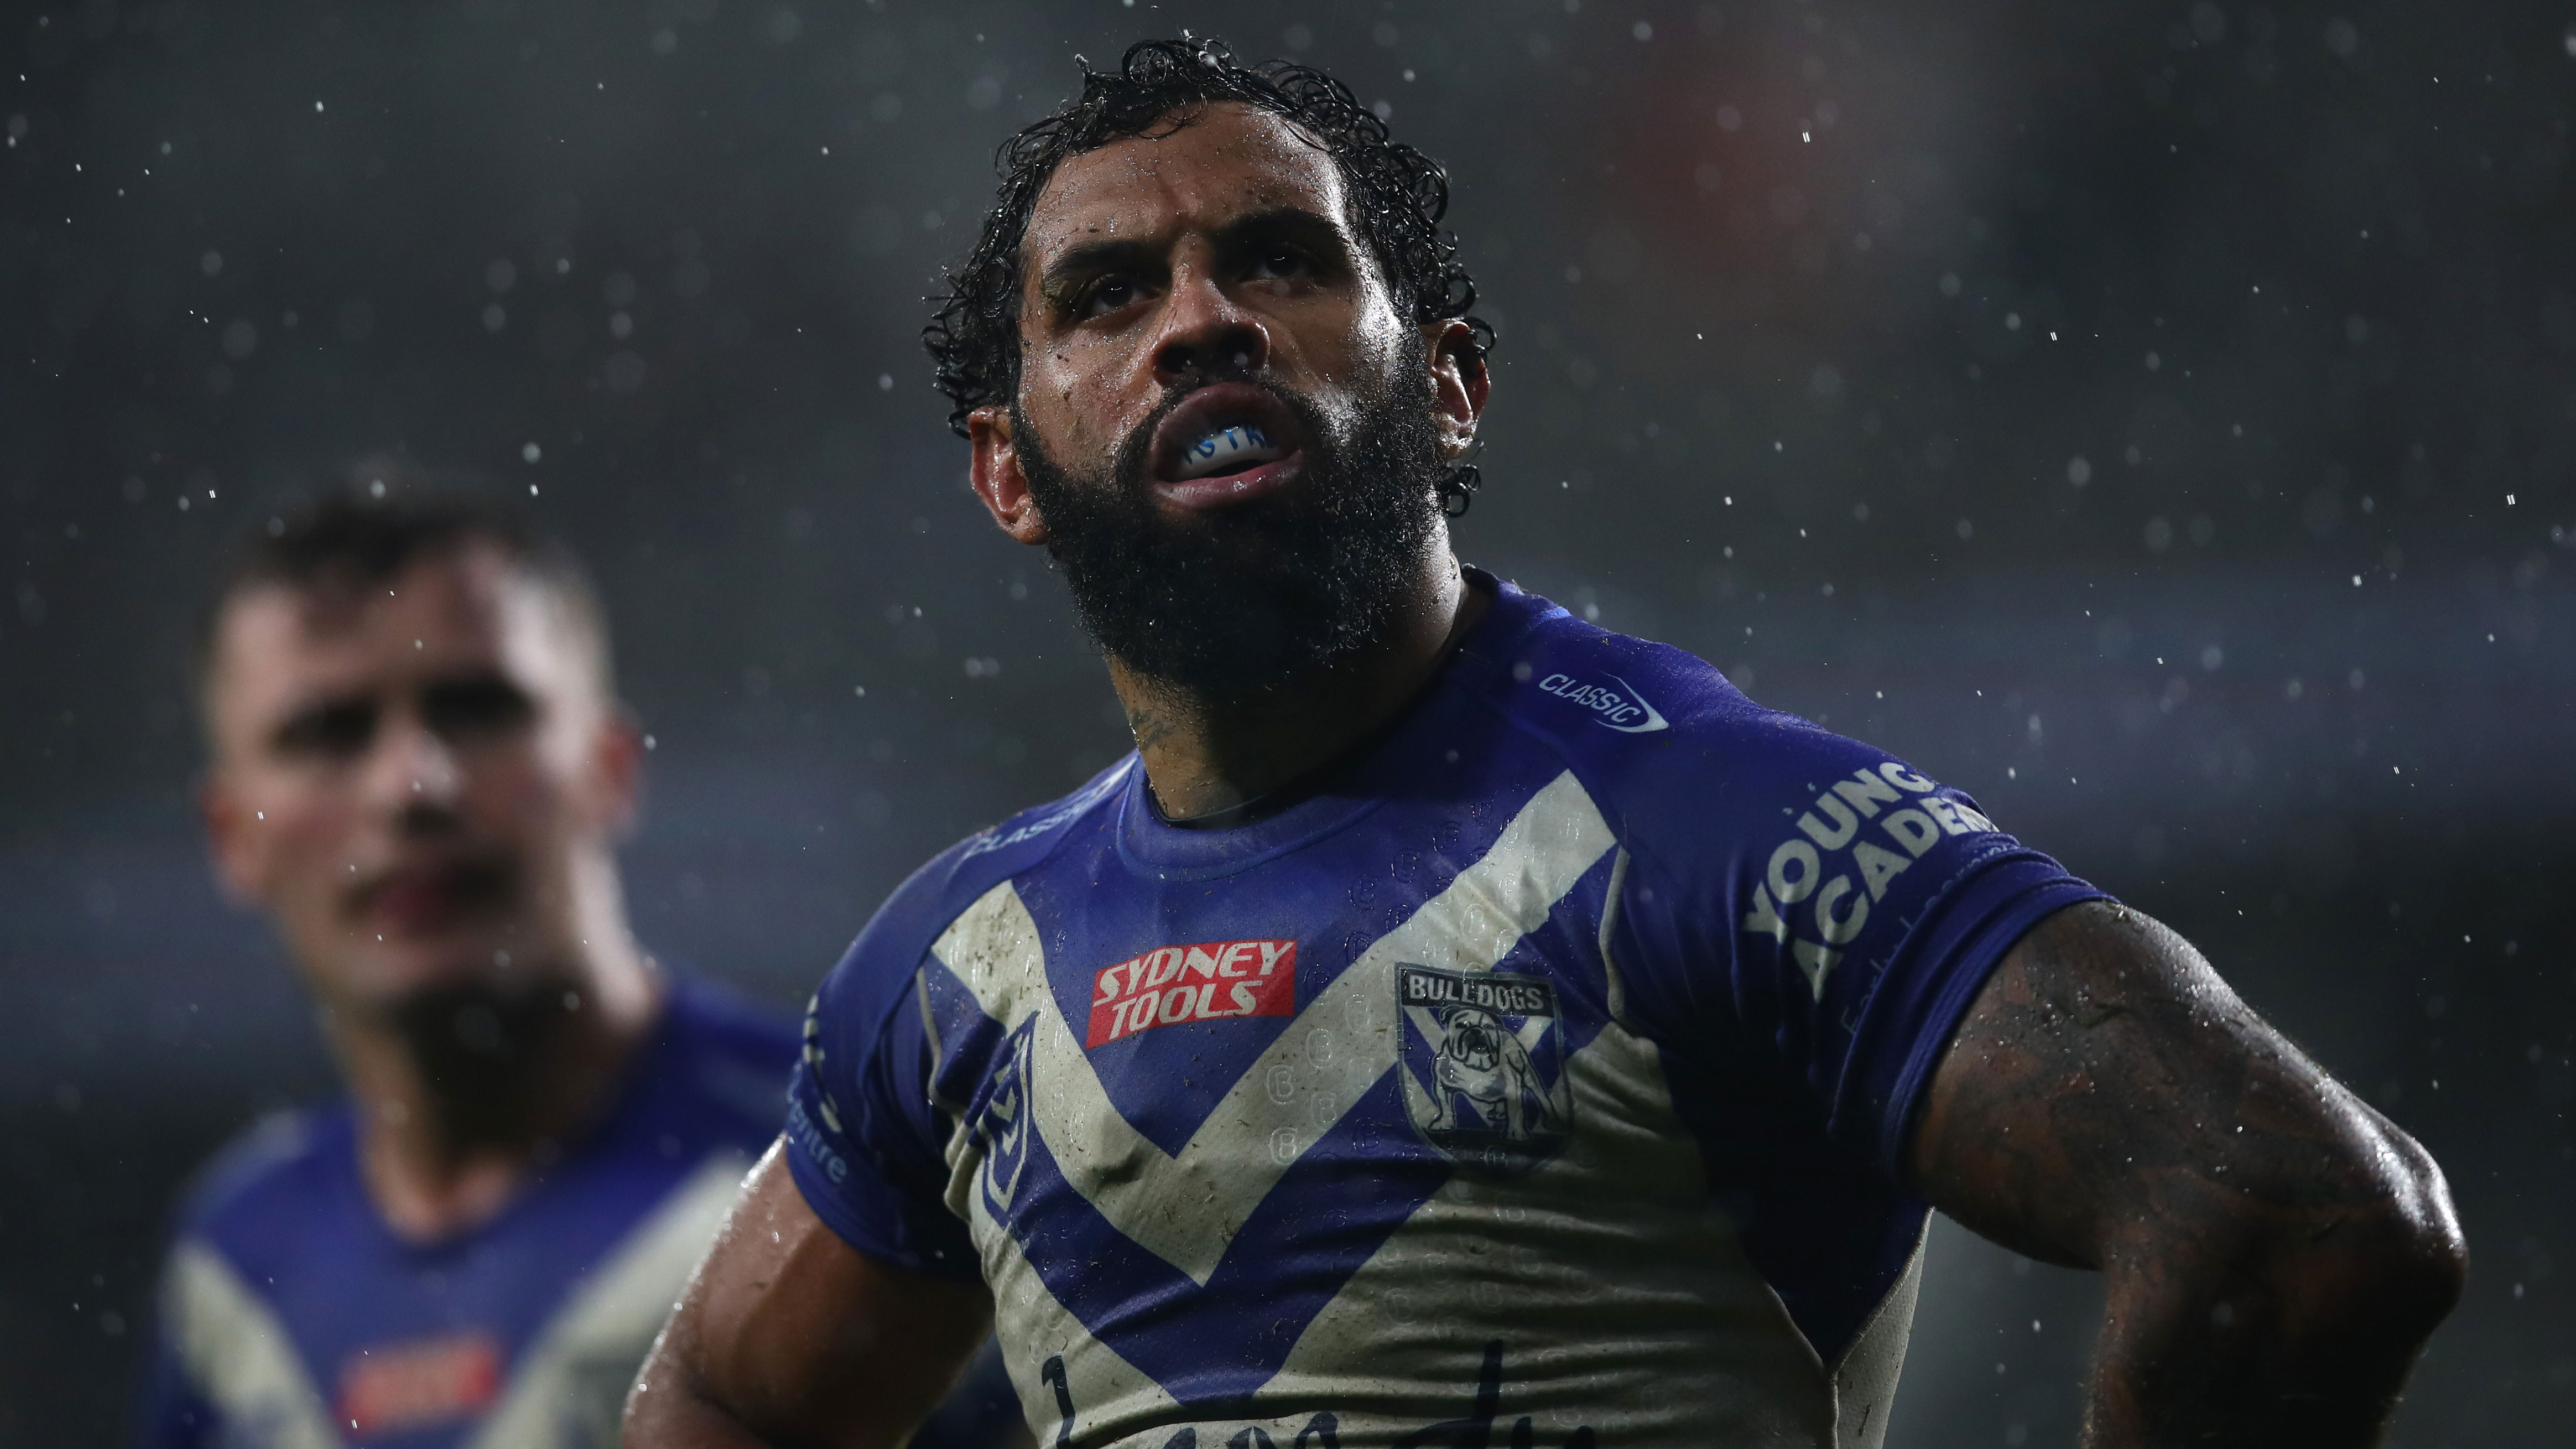 NRL News | Extreme response to wet weather football conditions, Billy Slater on Melbourne Storm